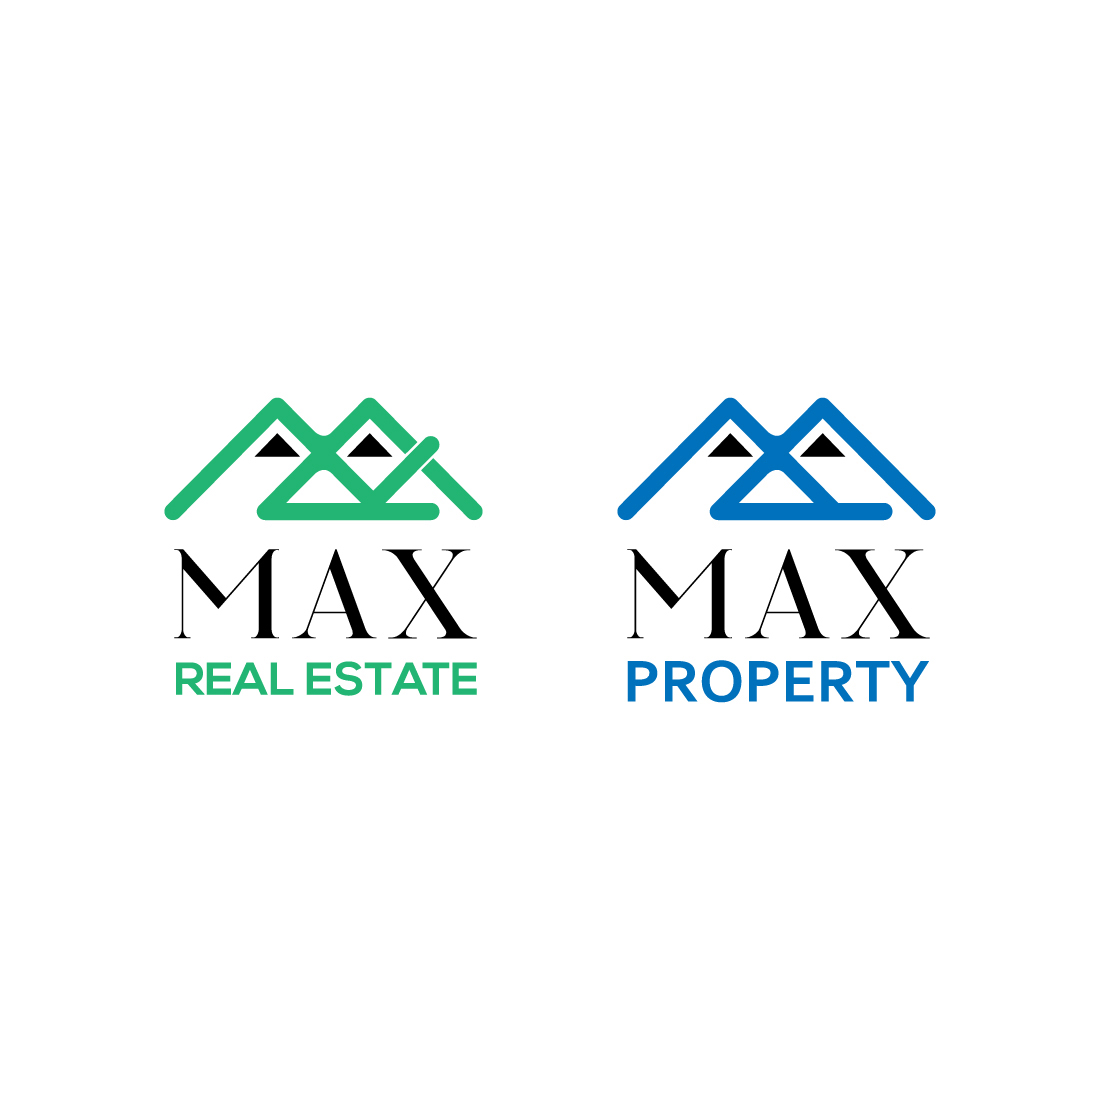 Property and Real Estate Company Logo Template 2 in 1.